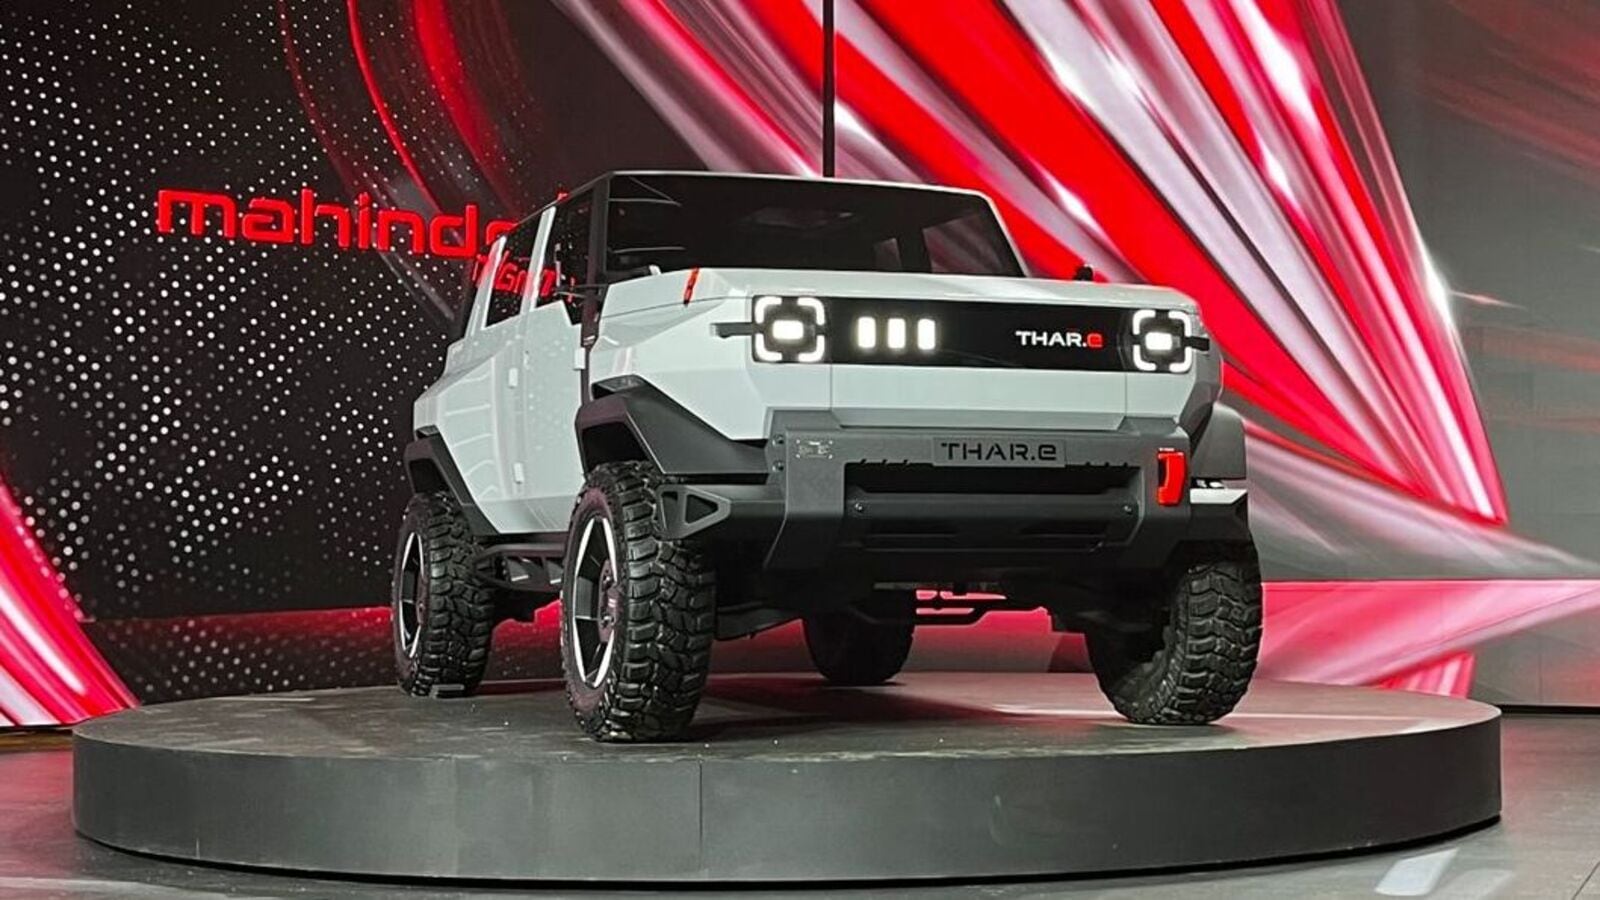 Mahindra Thar.e electric SUV concept breaks cover. Key things to know